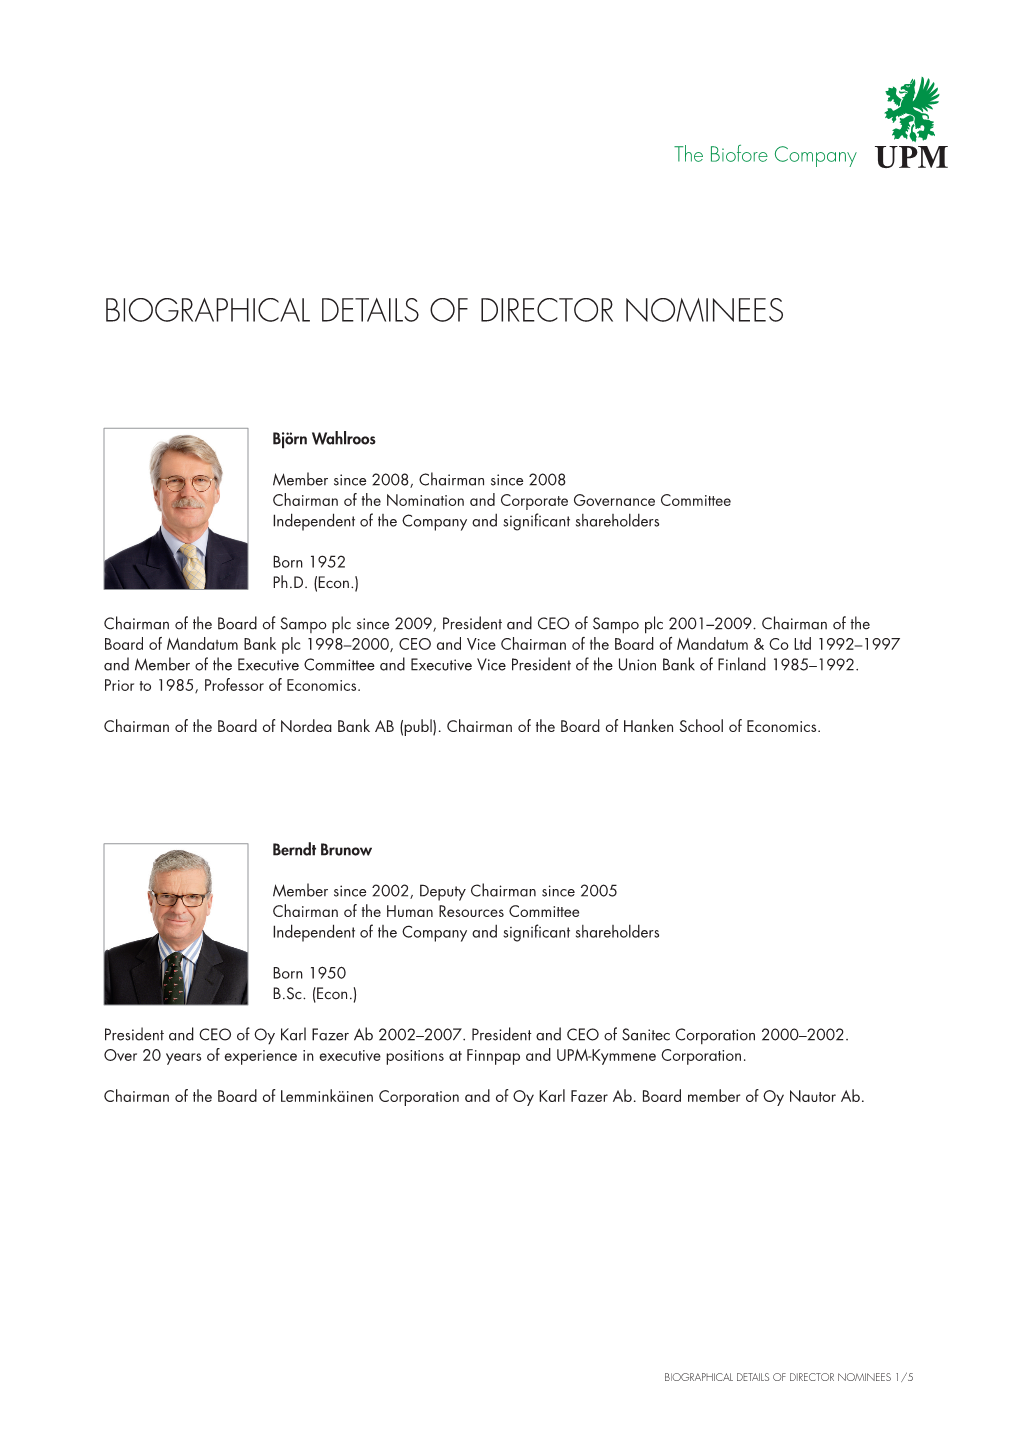 Biographical Details of Director Nominees